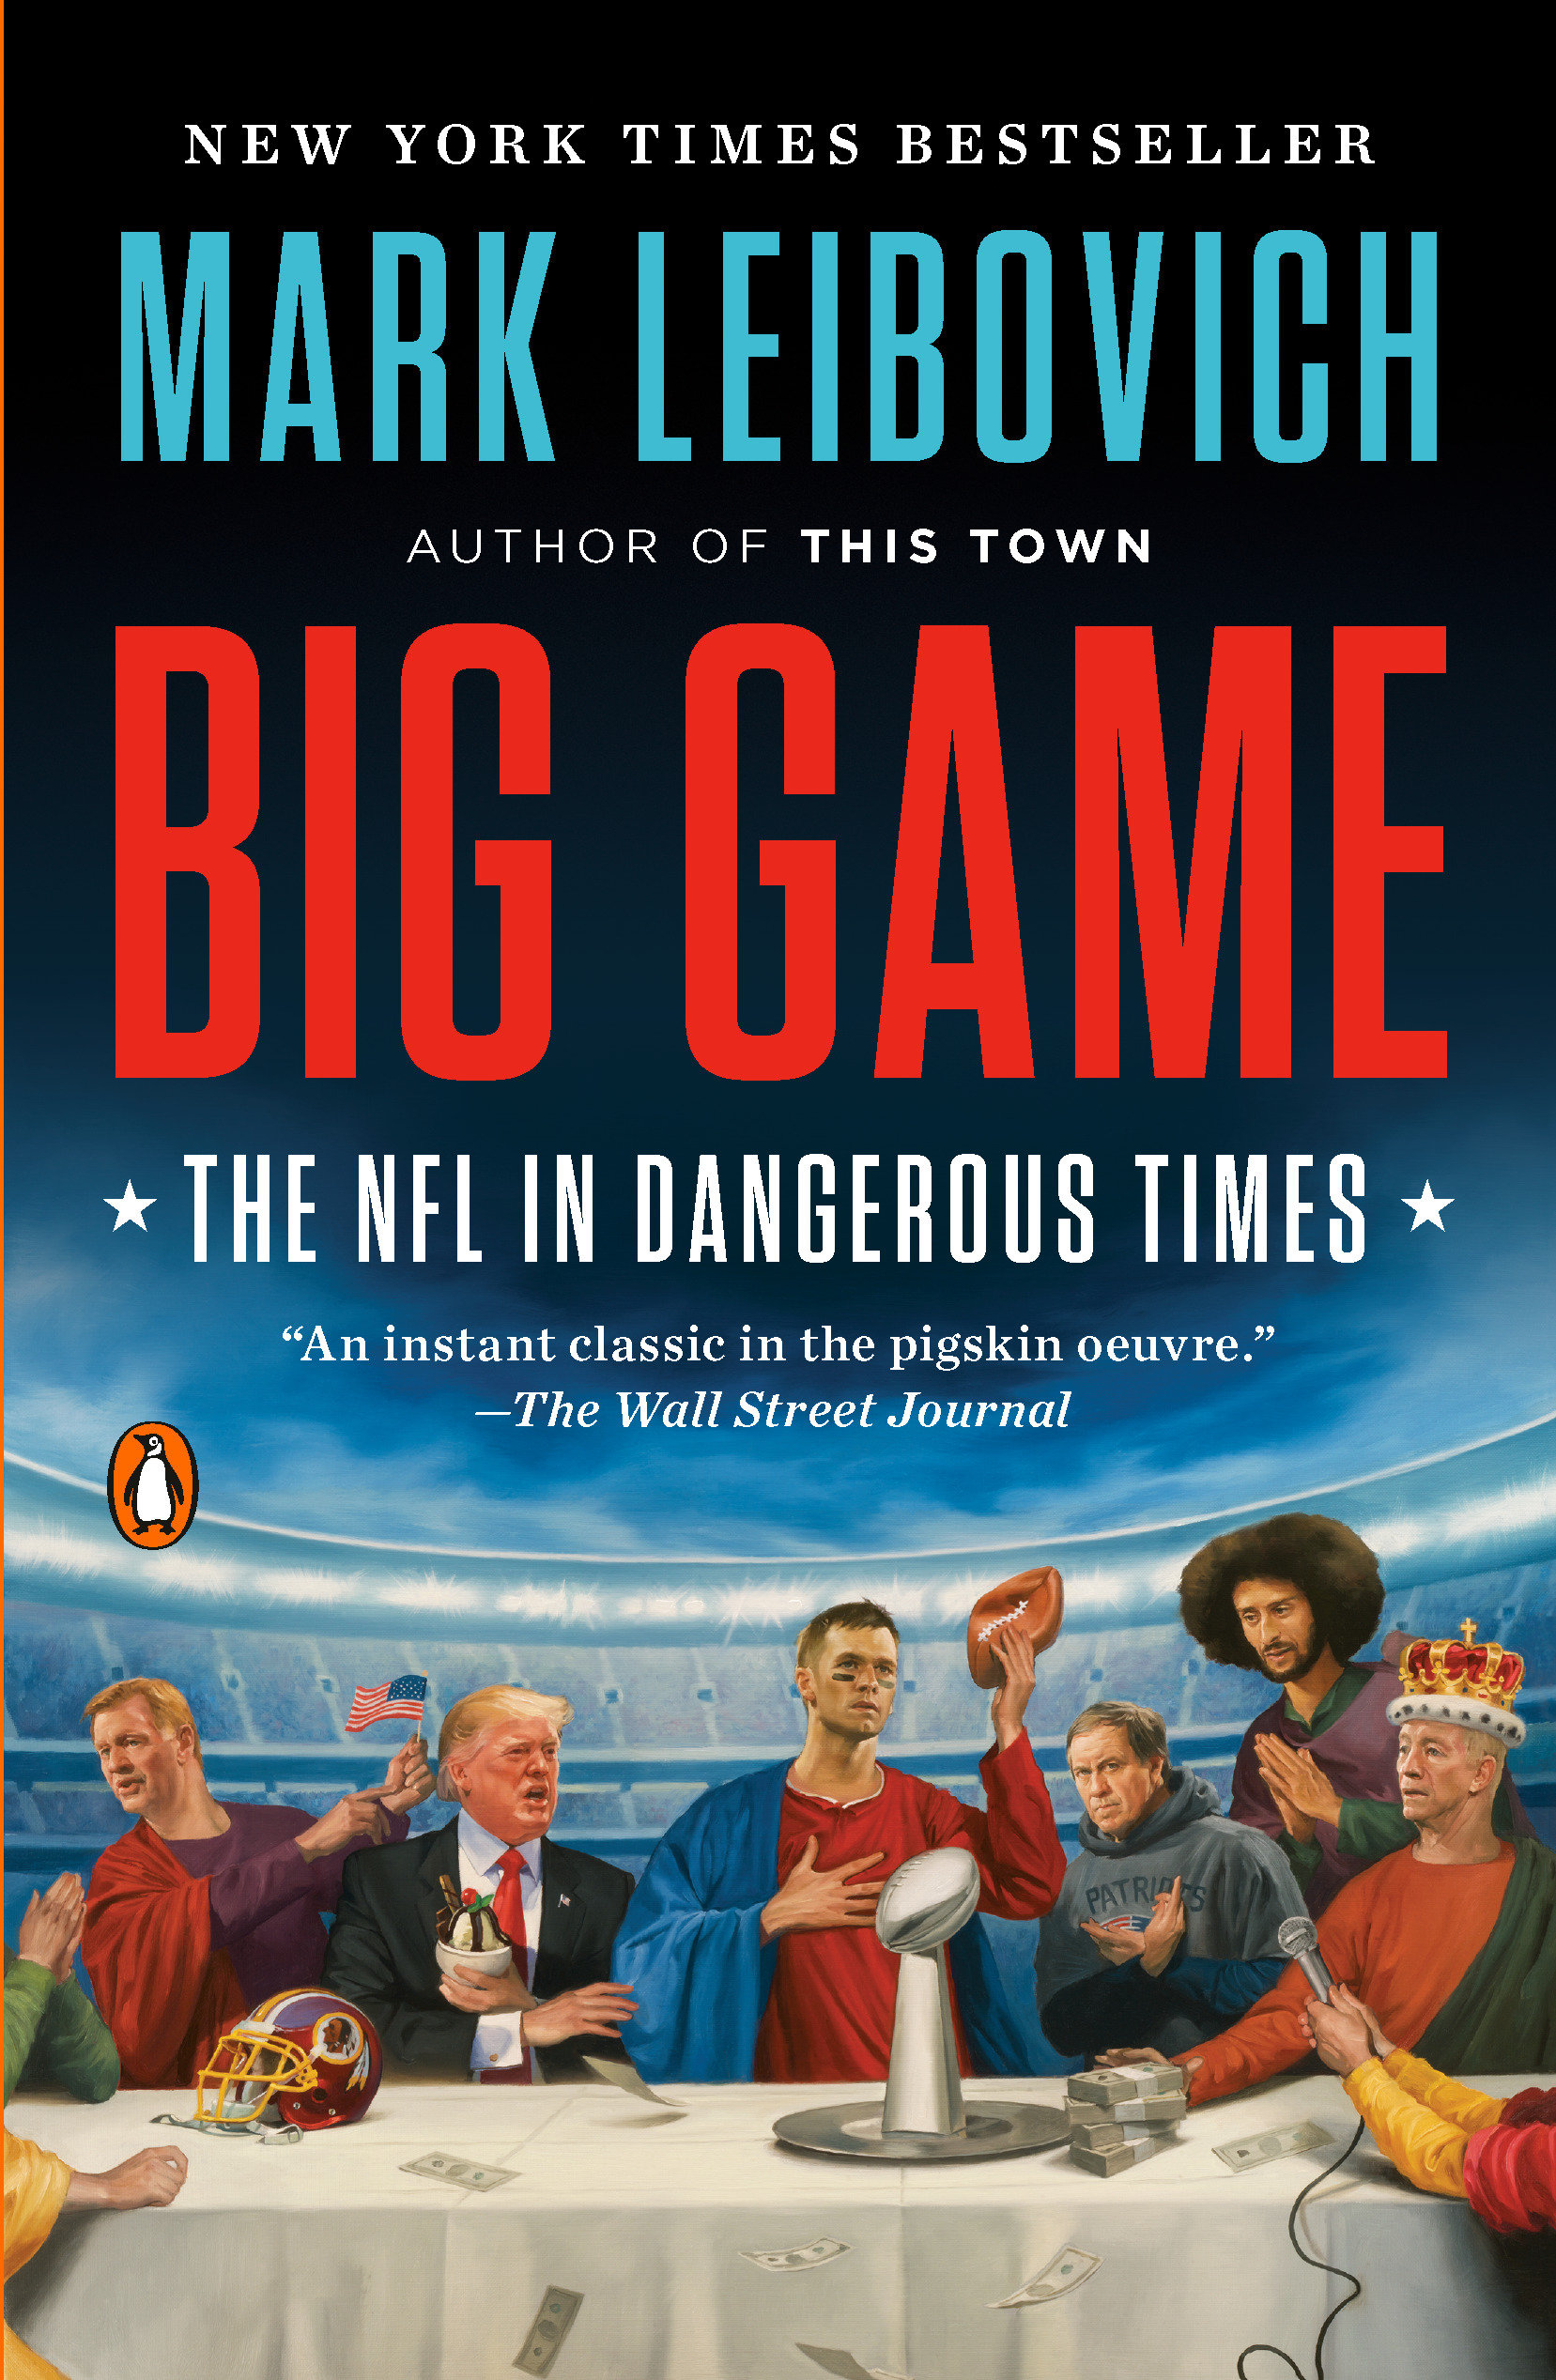 Big game the NFL in dangerous times cover image